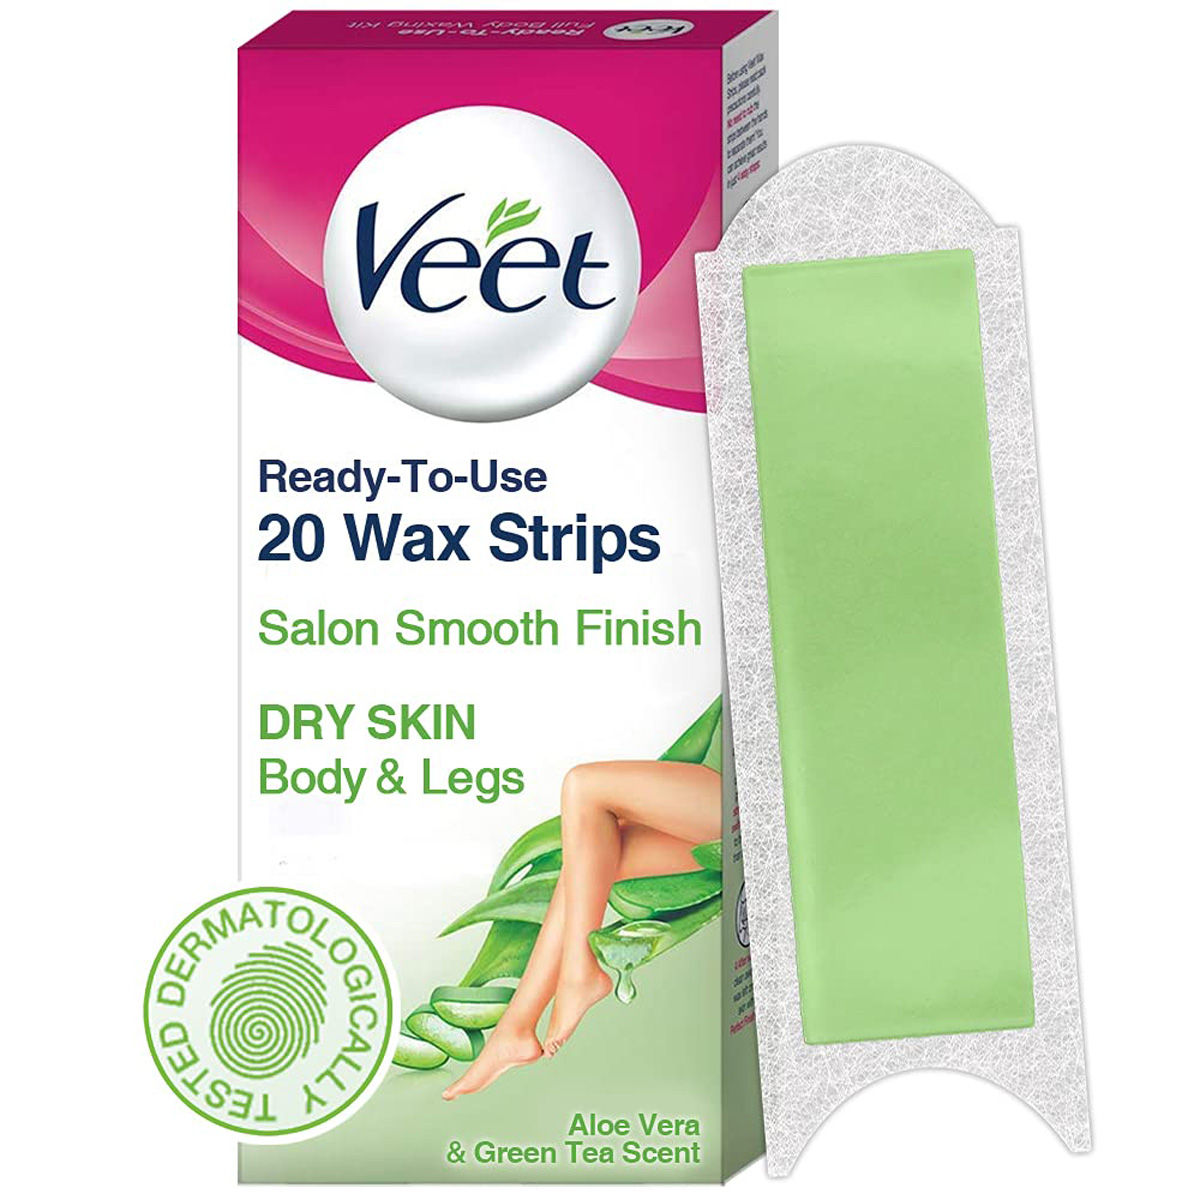 Veet Ready to Use Wax Strips Full Body Waxing Kit for Dry Skin, 20 Count, Pack of 1 